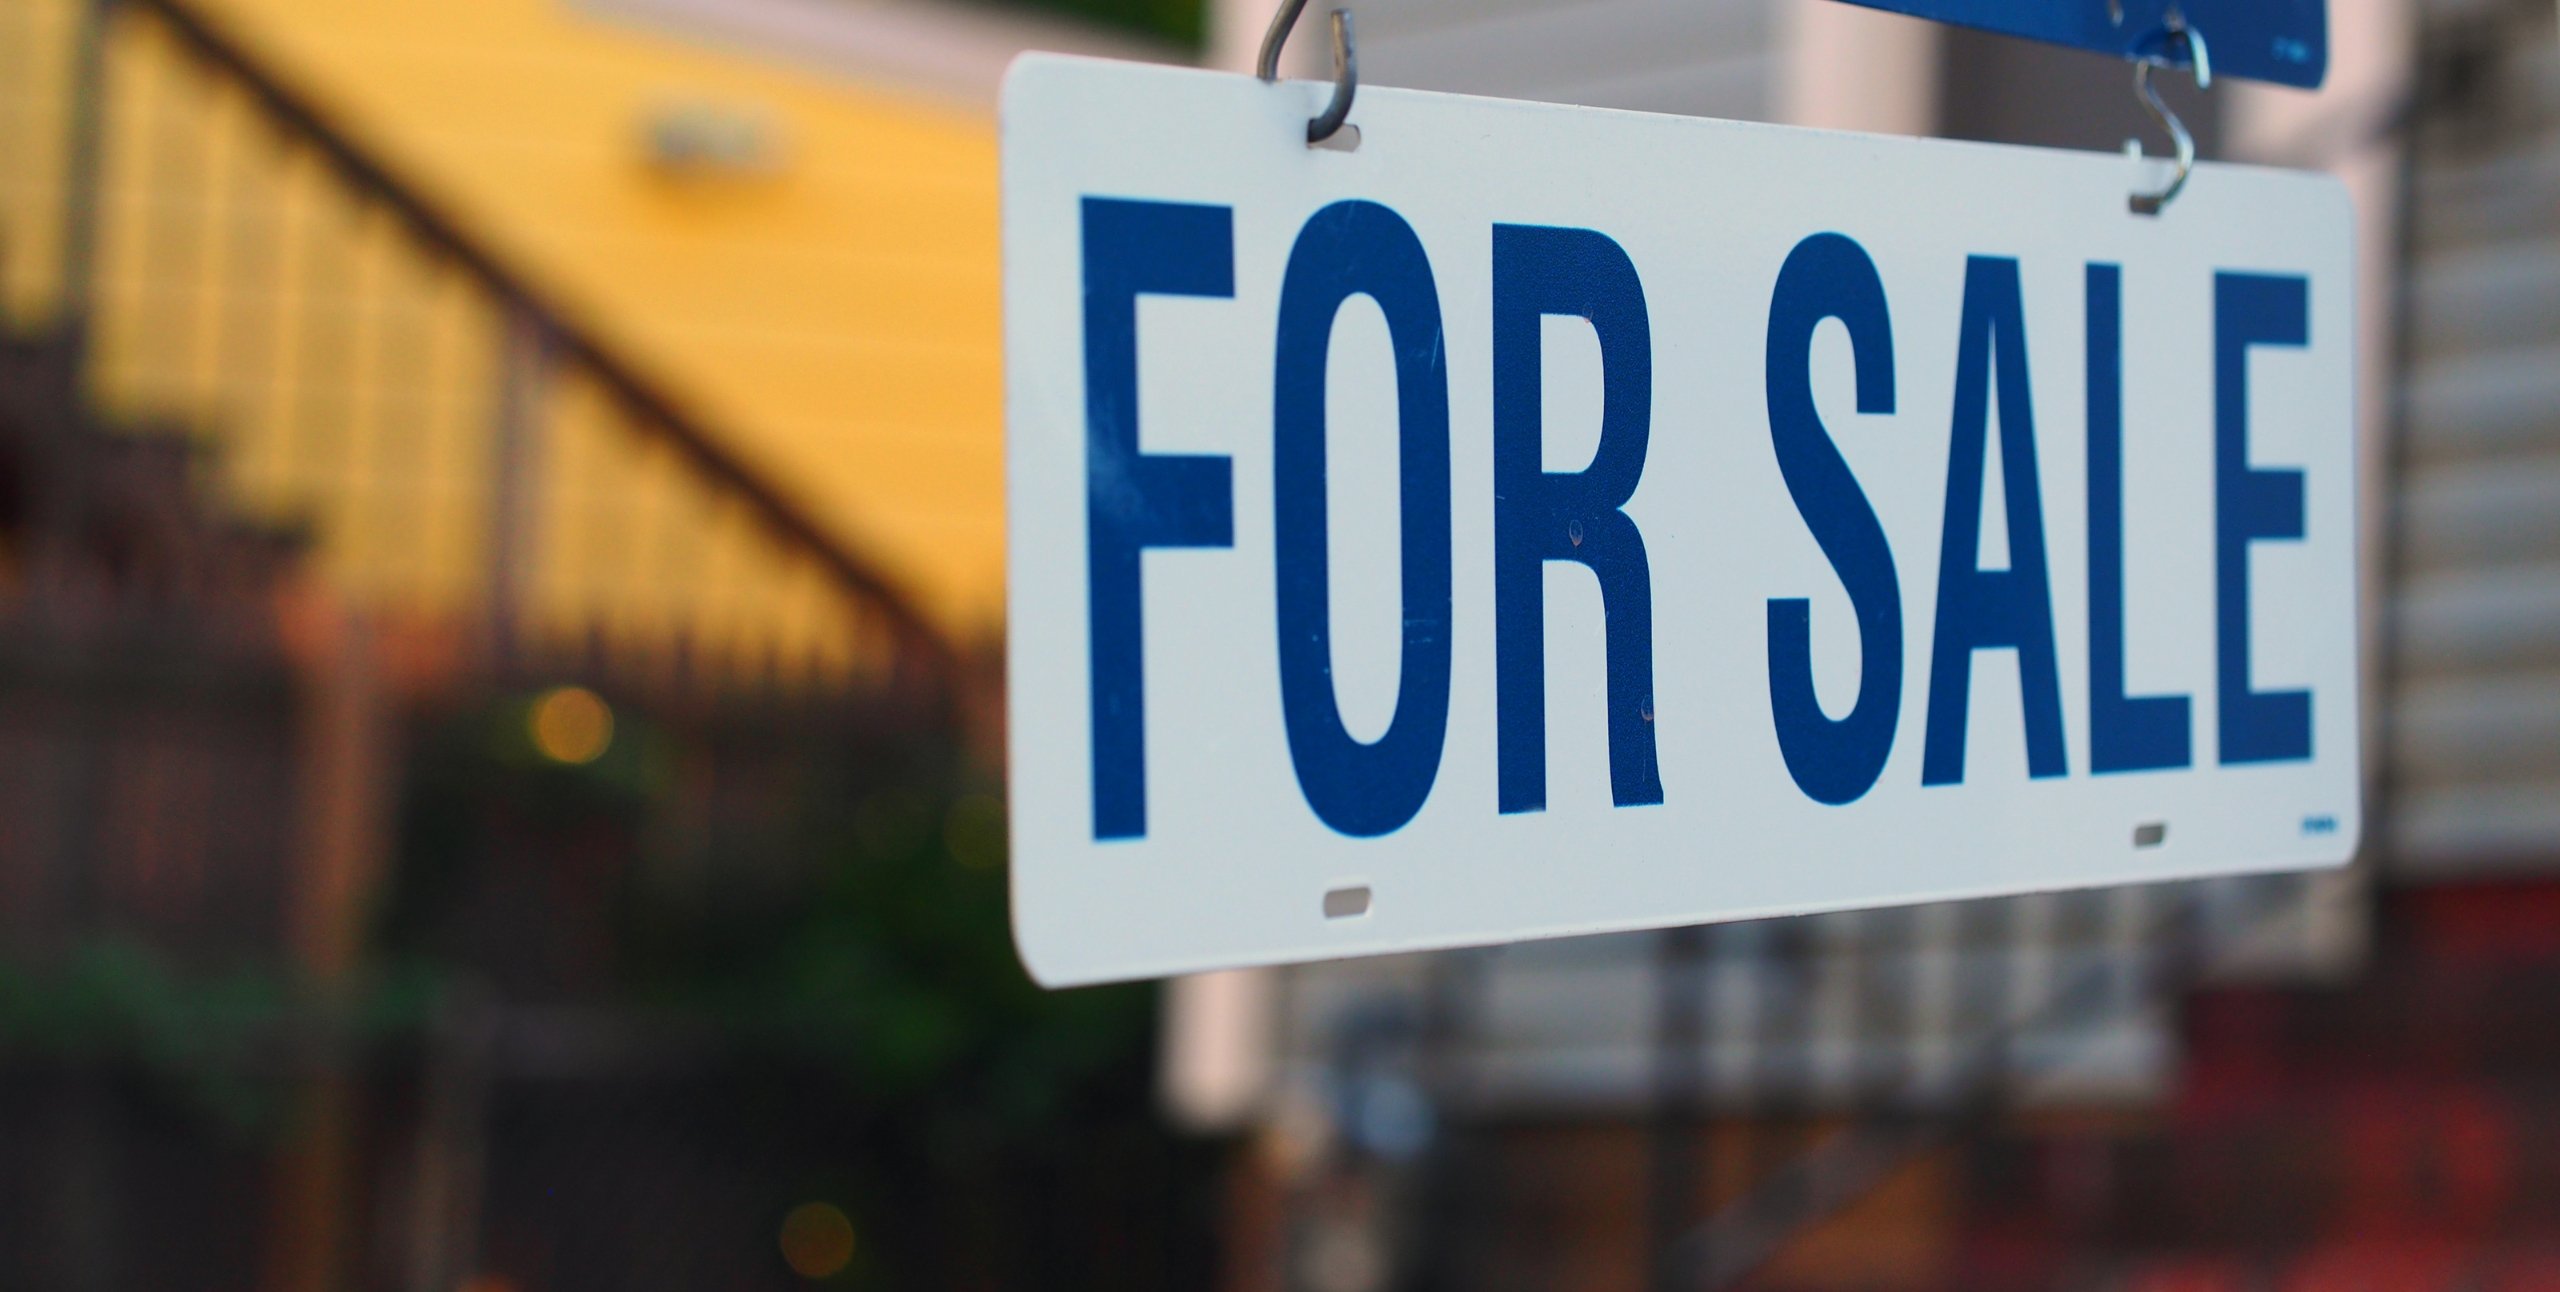 blue for sale sign